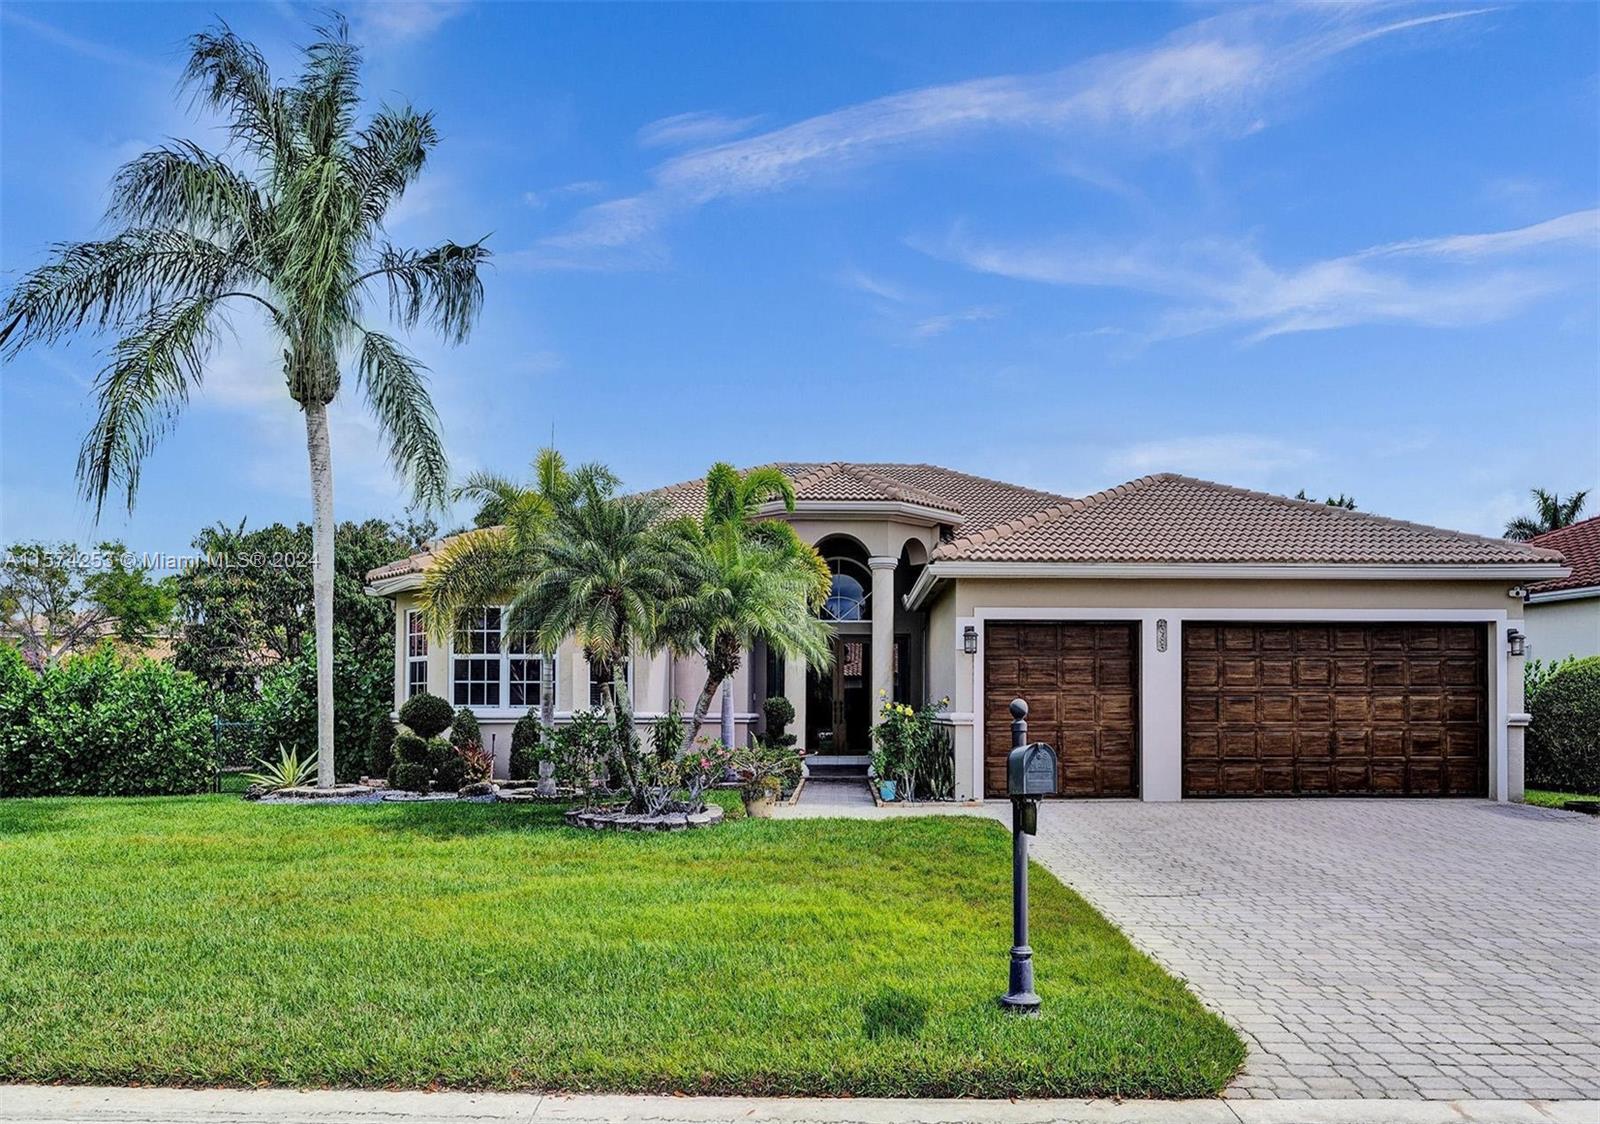 4985 Nw 120th Ave, Coral Springs, Broward County, Florida - 5 Bedrooms  
4 Bathrooms - 